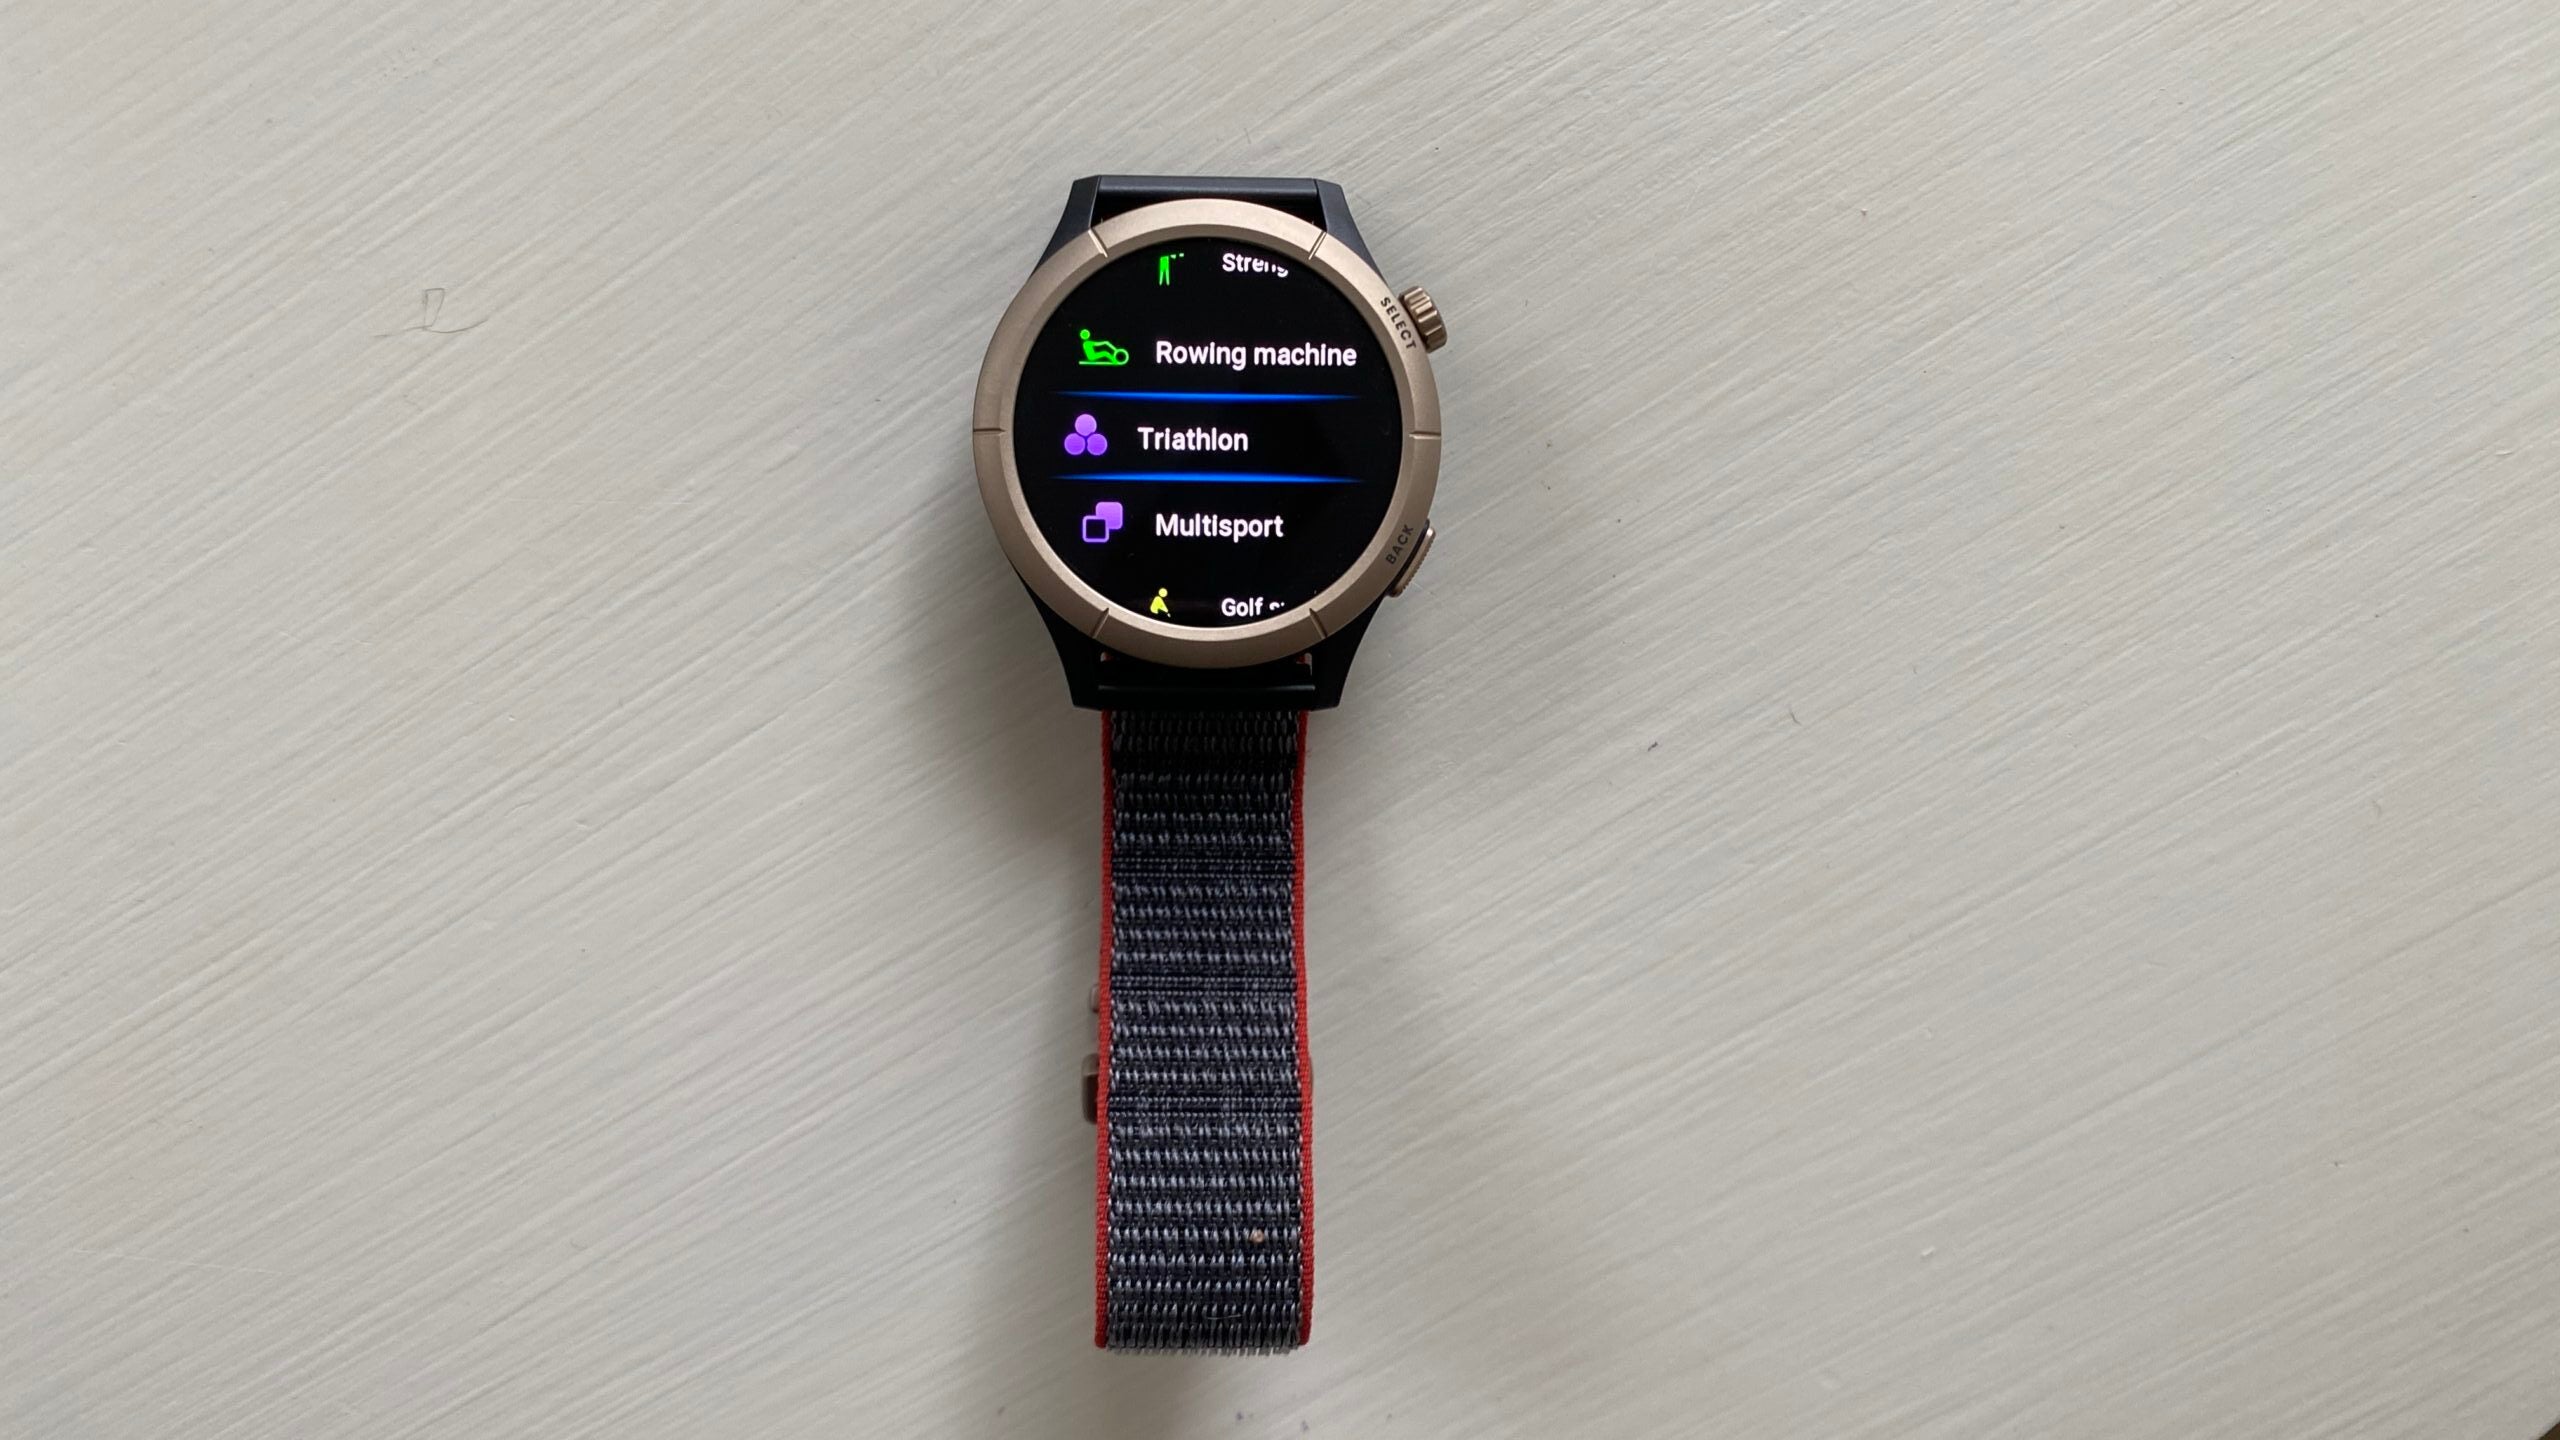 Amazfit Cheetah Square Review l A GREAT Combo Sport and Smartwatch! 